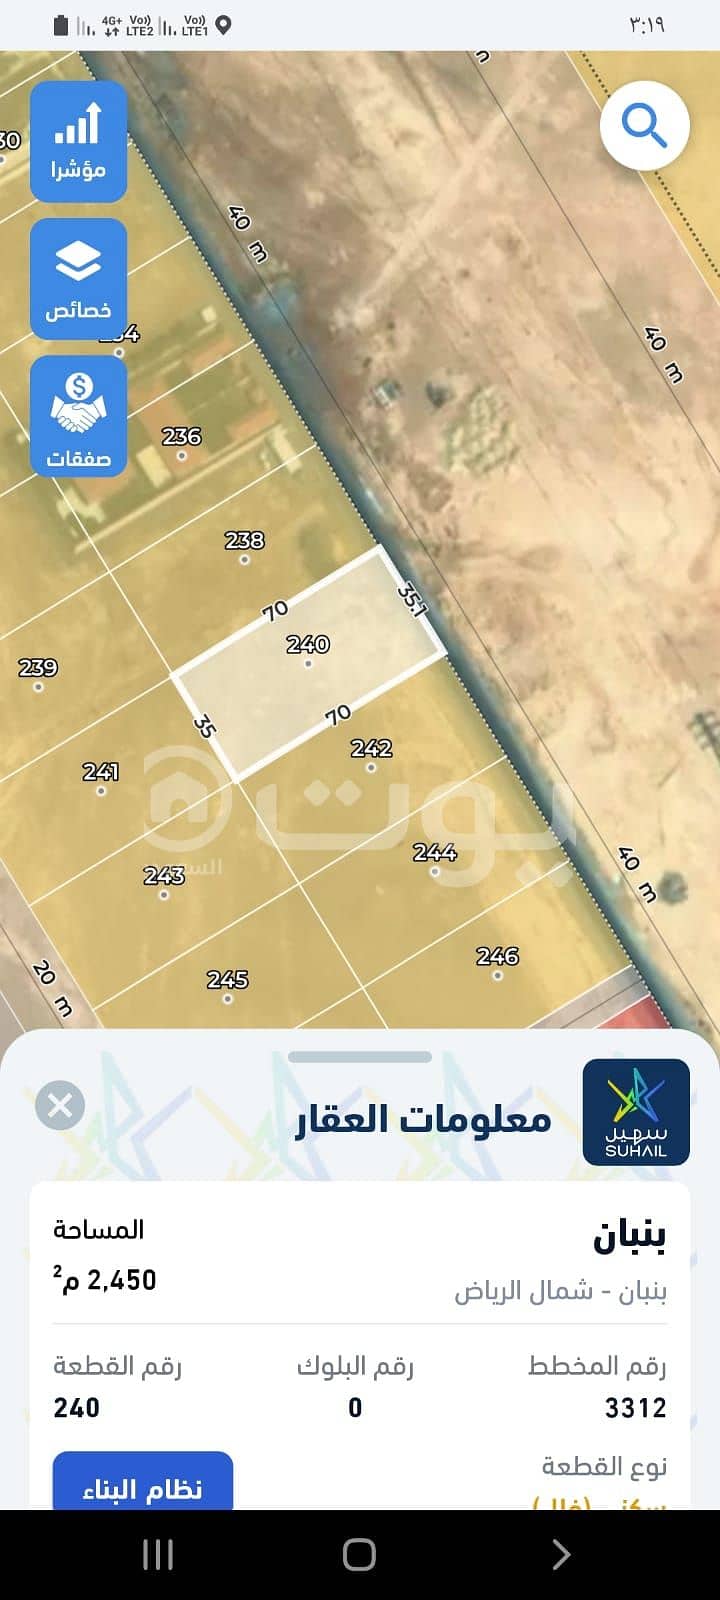 commercial land For sale in Al Kair District, North of Riyadh